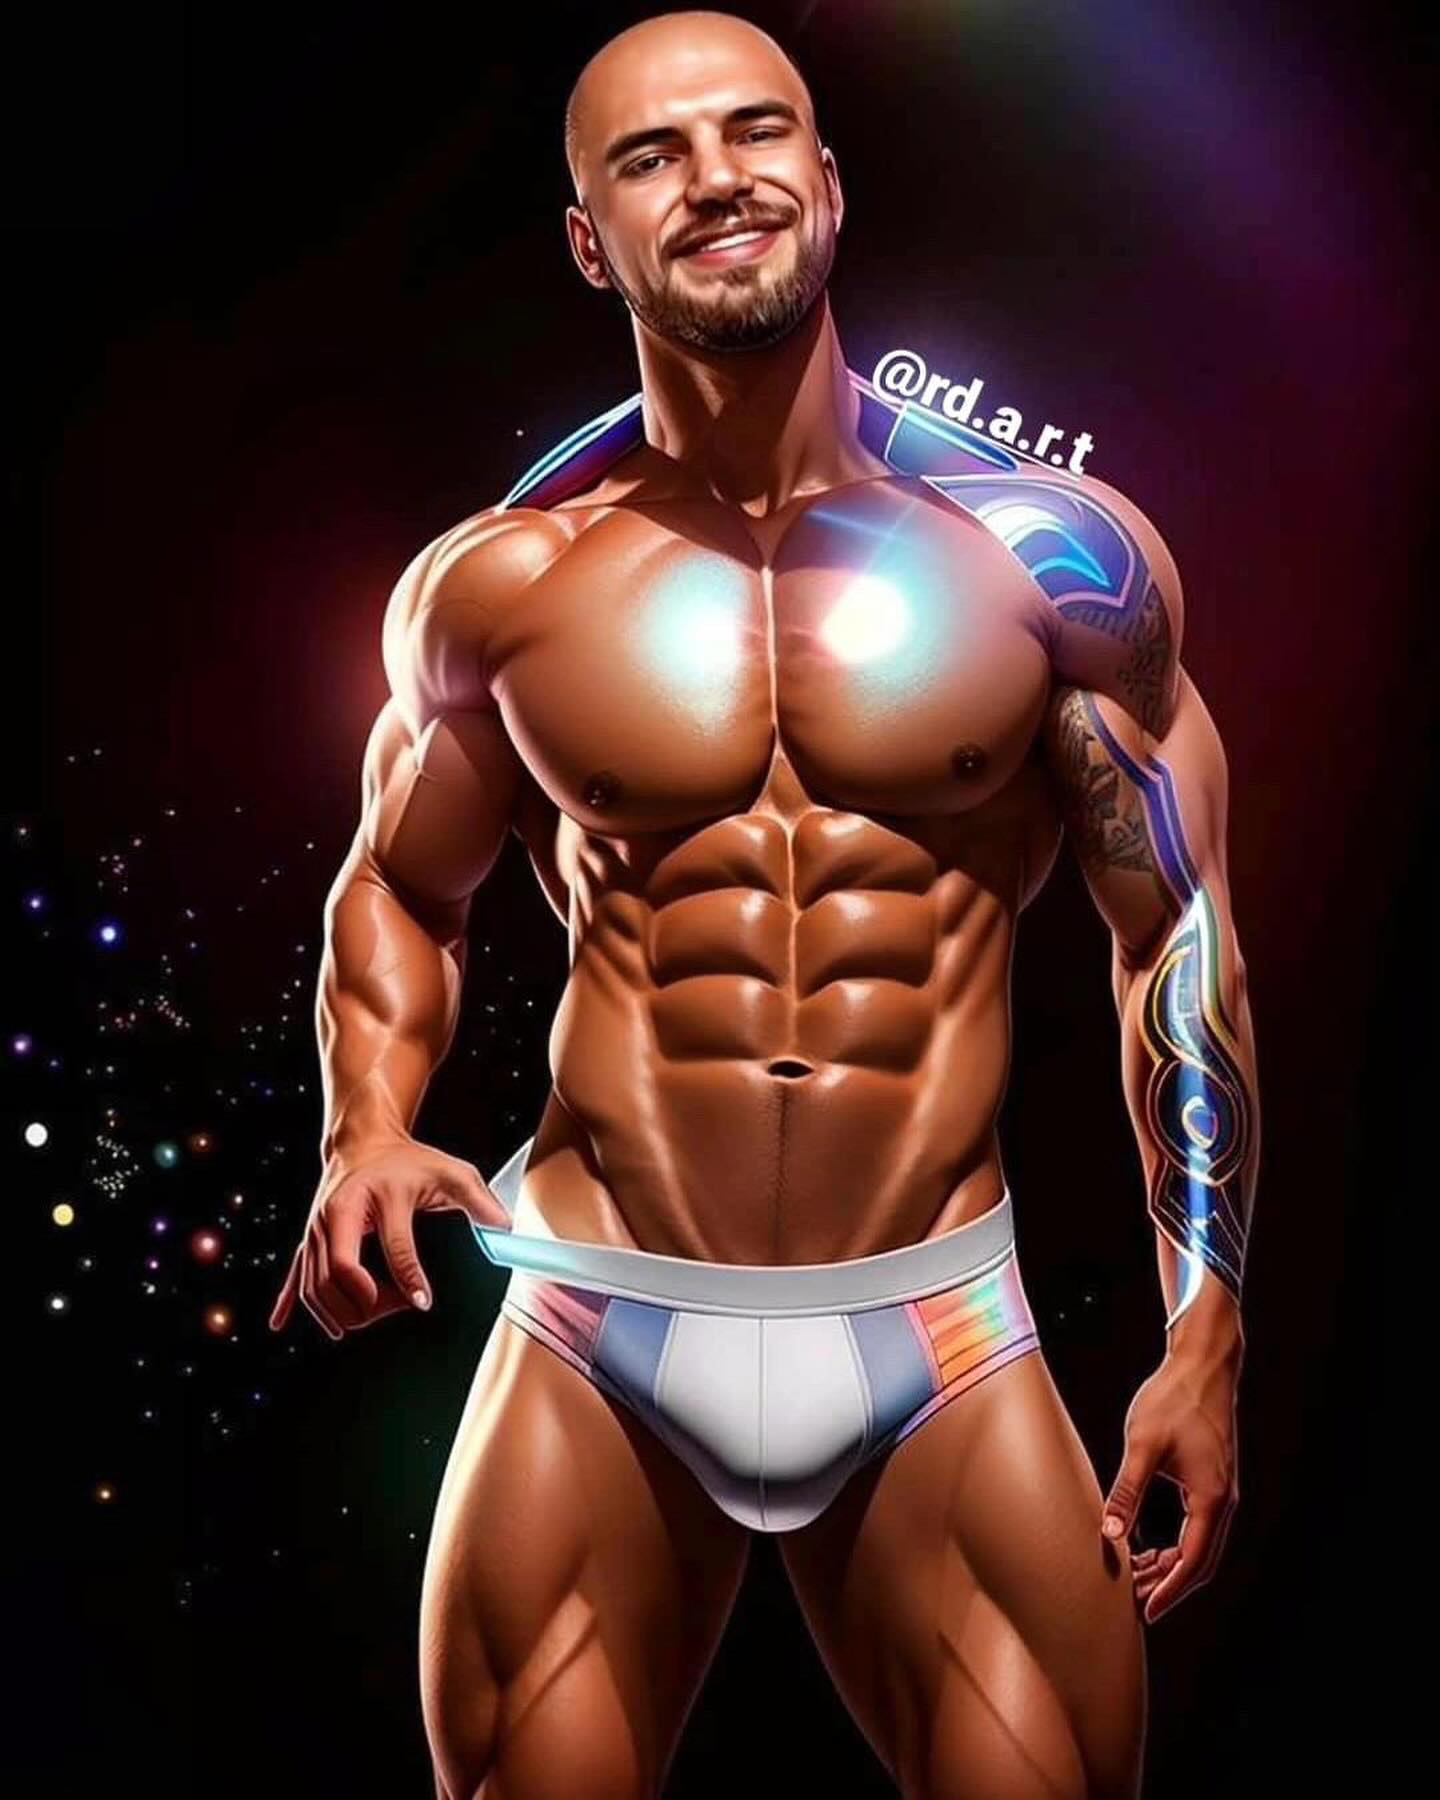 #art #male #muscledaddy #hunk #sexy #masculino #aesthetic #athletics #mensphysique #string #power #abs #shredded #ripped #6pack